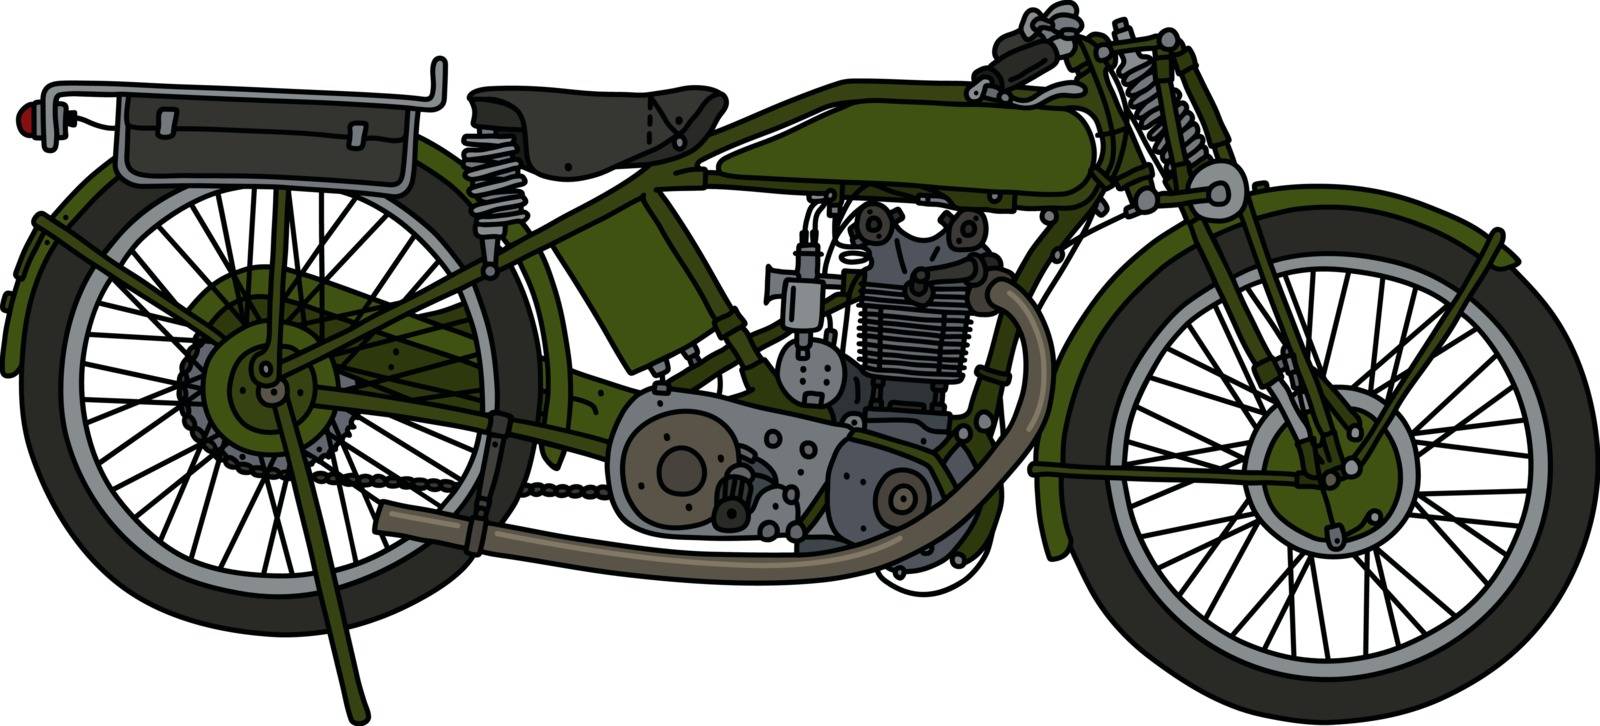 The hand drawing of a vintage green motorcycle